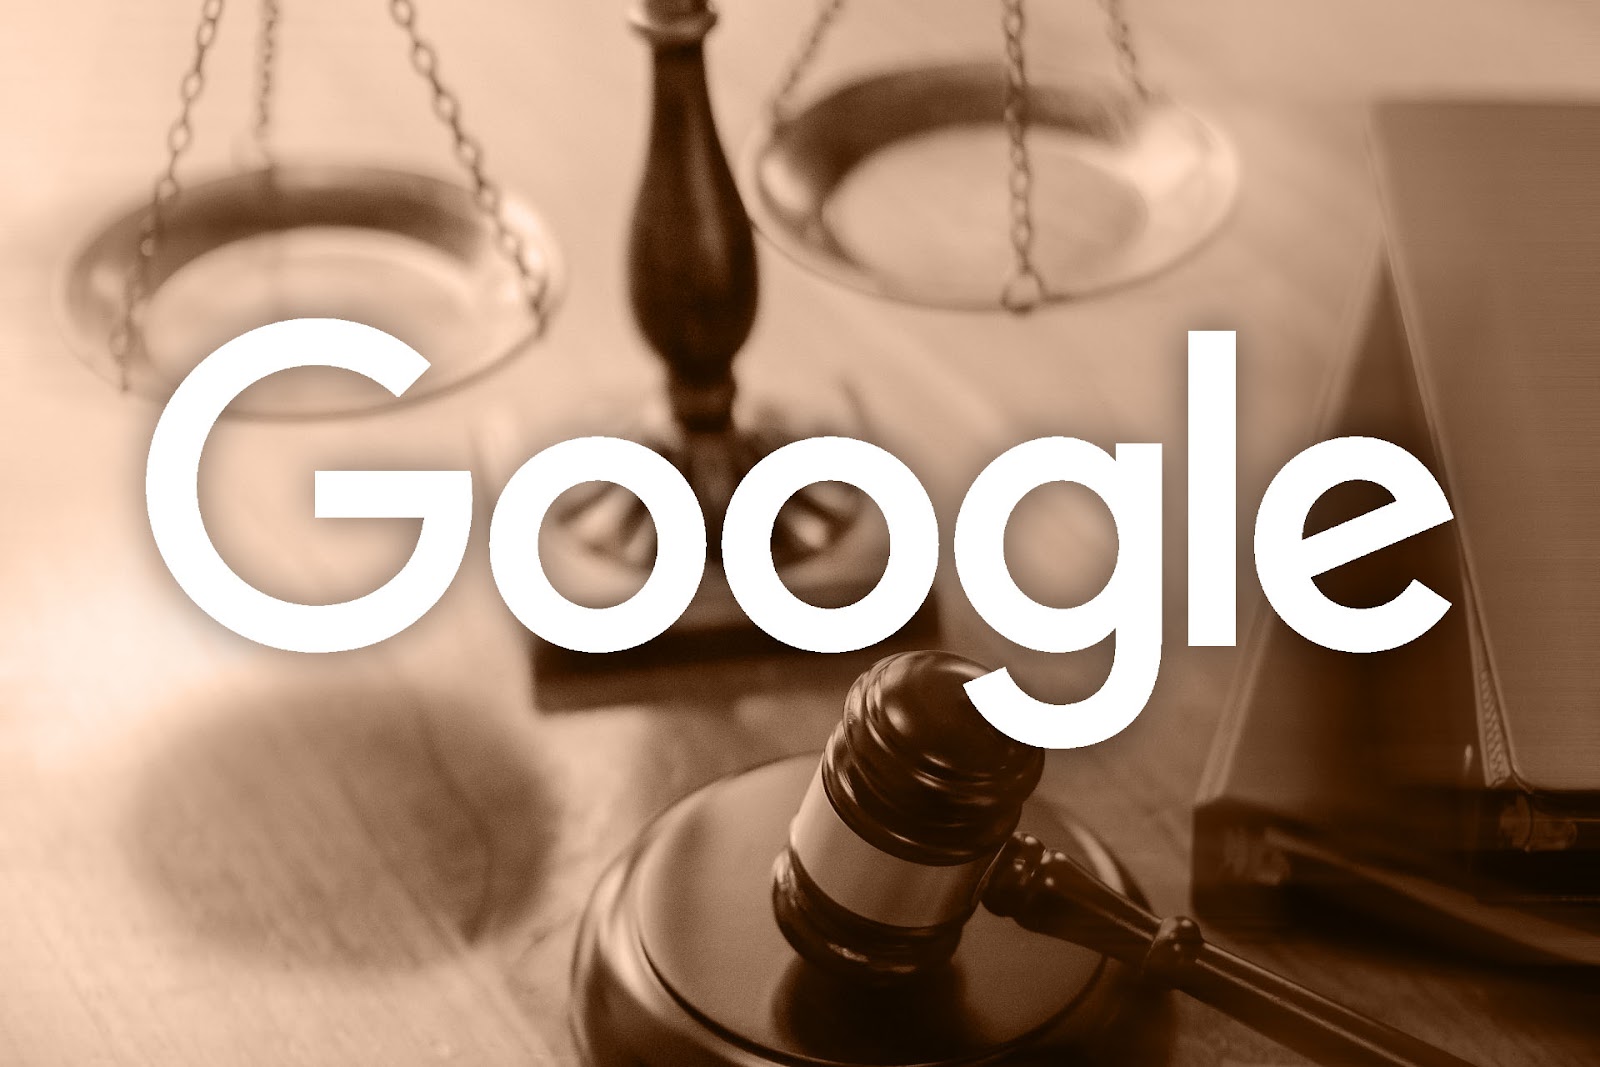 spam-resource:-google-hires-law-firm-perkins-coie-to-fight-rnc’s-spam-filter-lawsuit